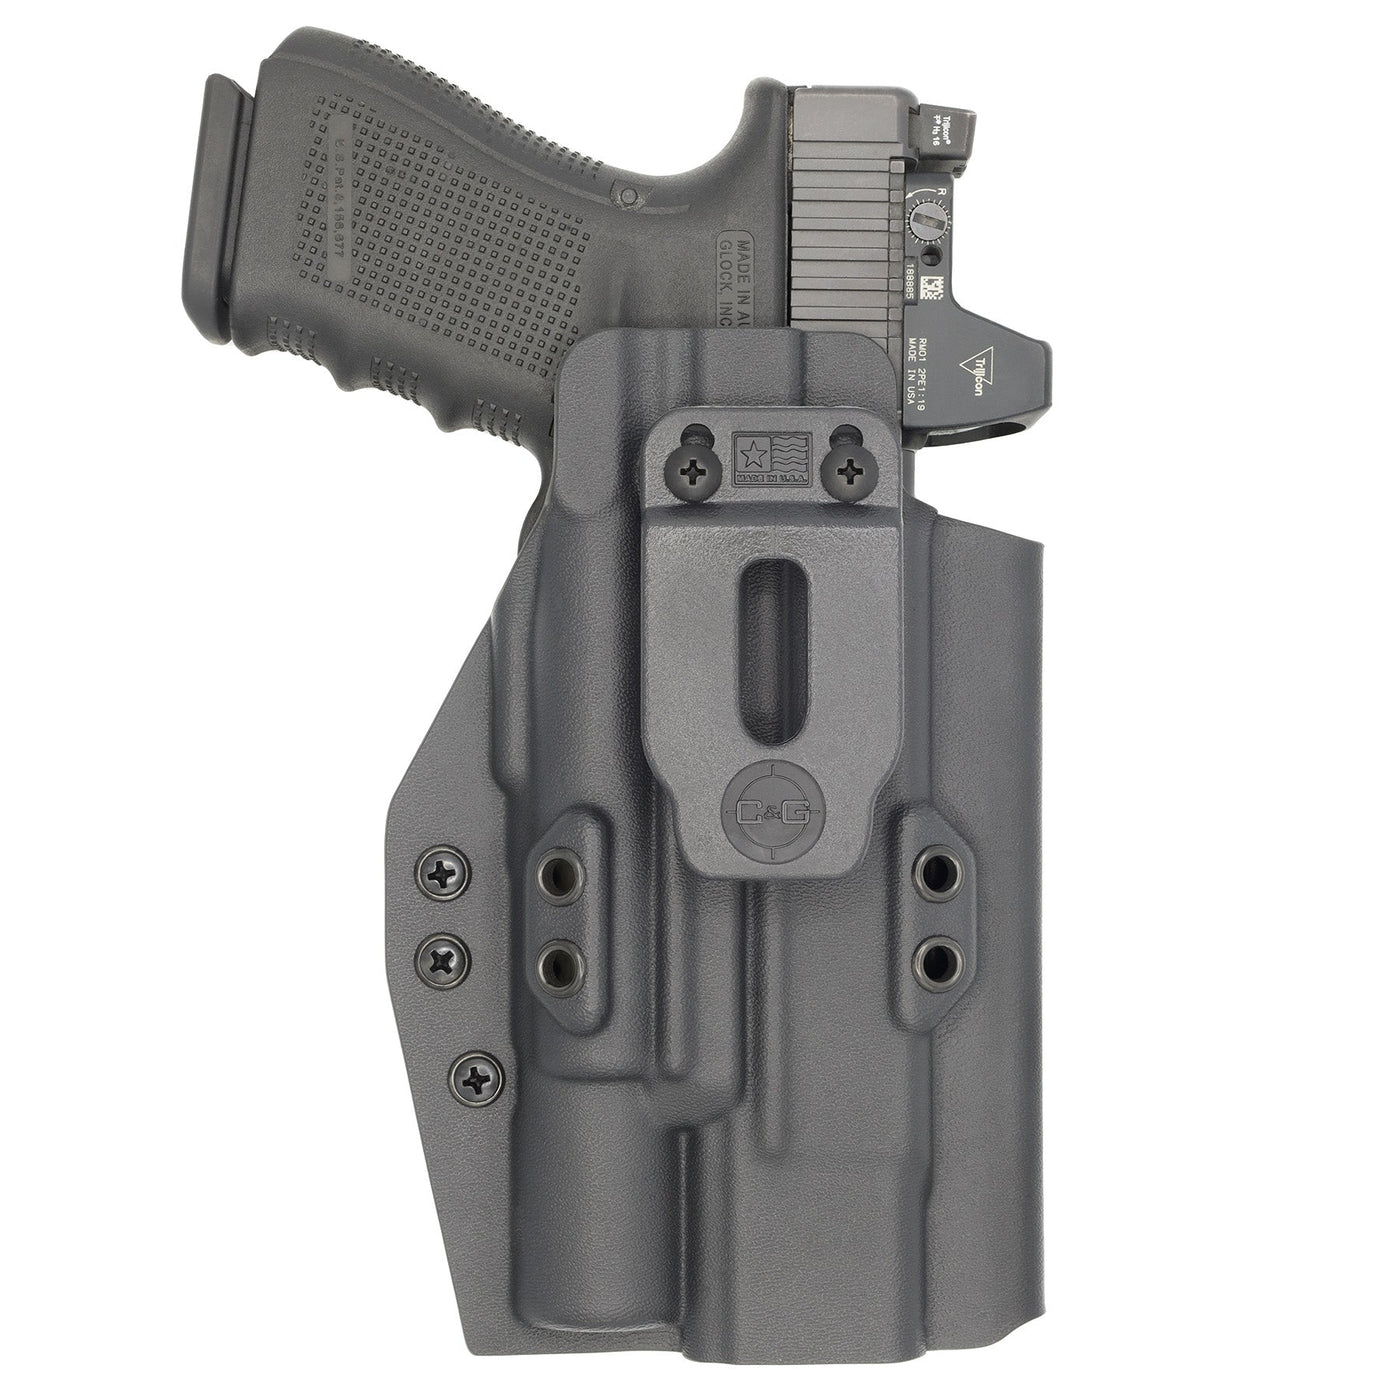 C&G Holsters Quickship IWB Tactical Glock 20/21 Surefire X300 in holstered position